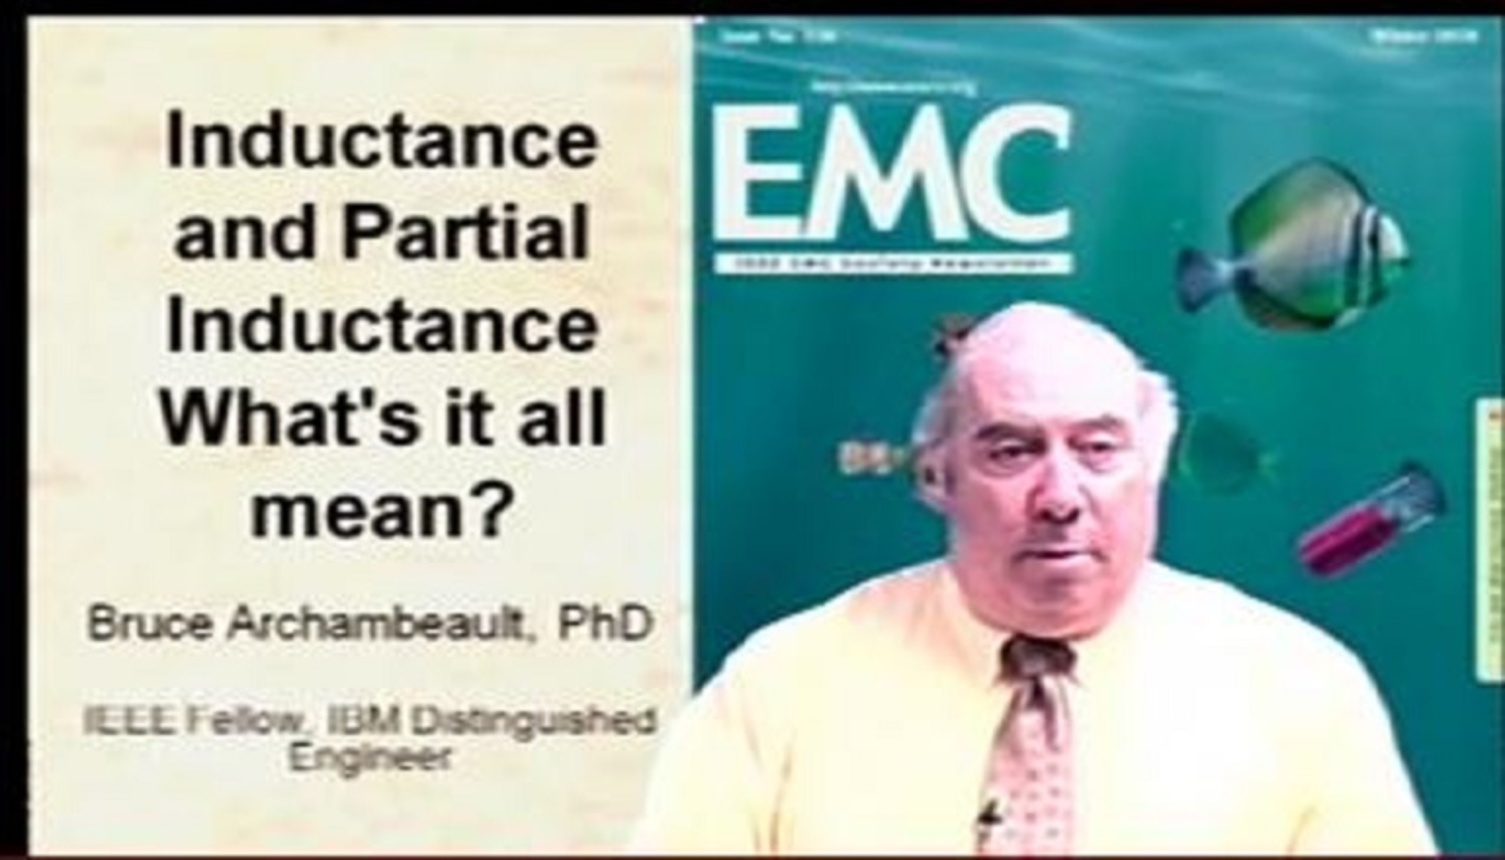 Inductance and Partial Inductance: What's It All Mean? Video